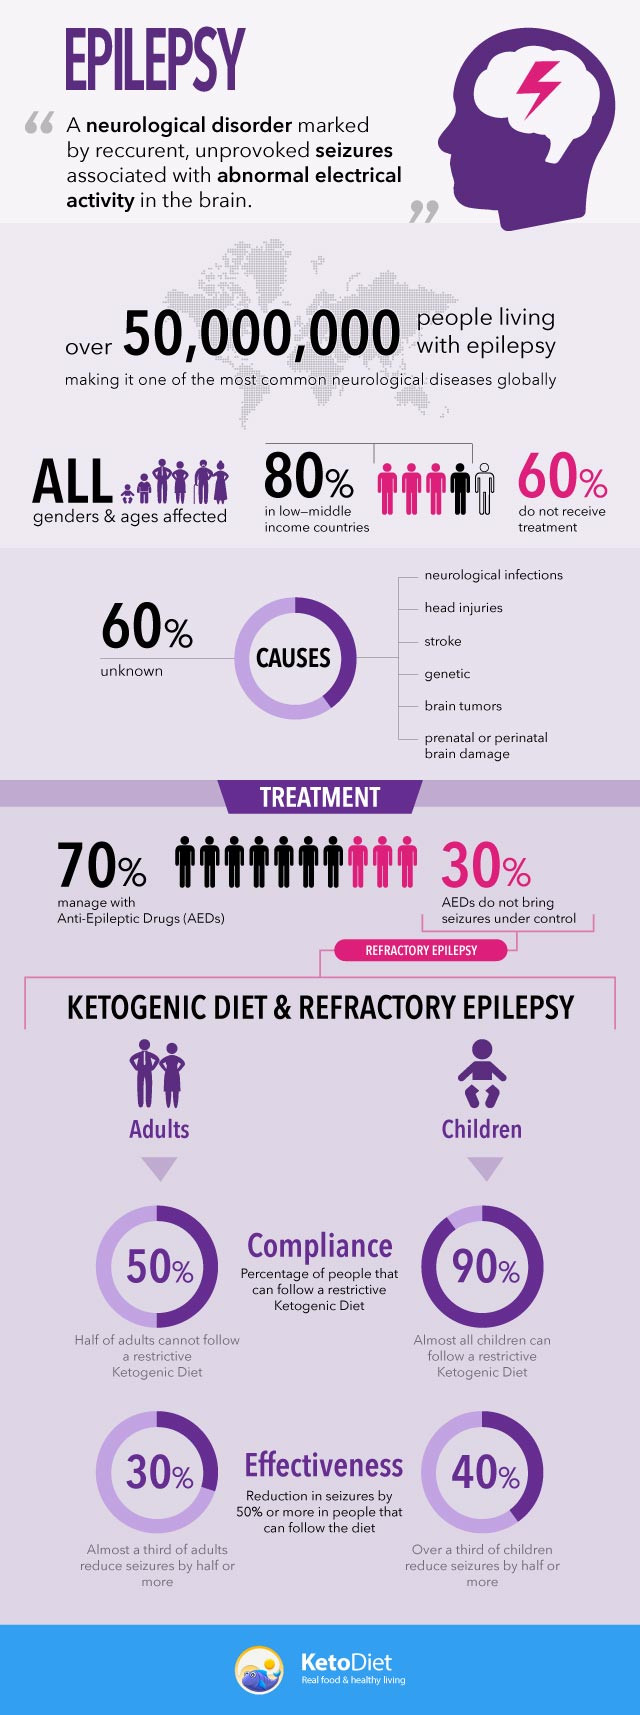 Keto Diet Epilepsy
 Can the Ketogenic Diet Help Patients with Epilepsy